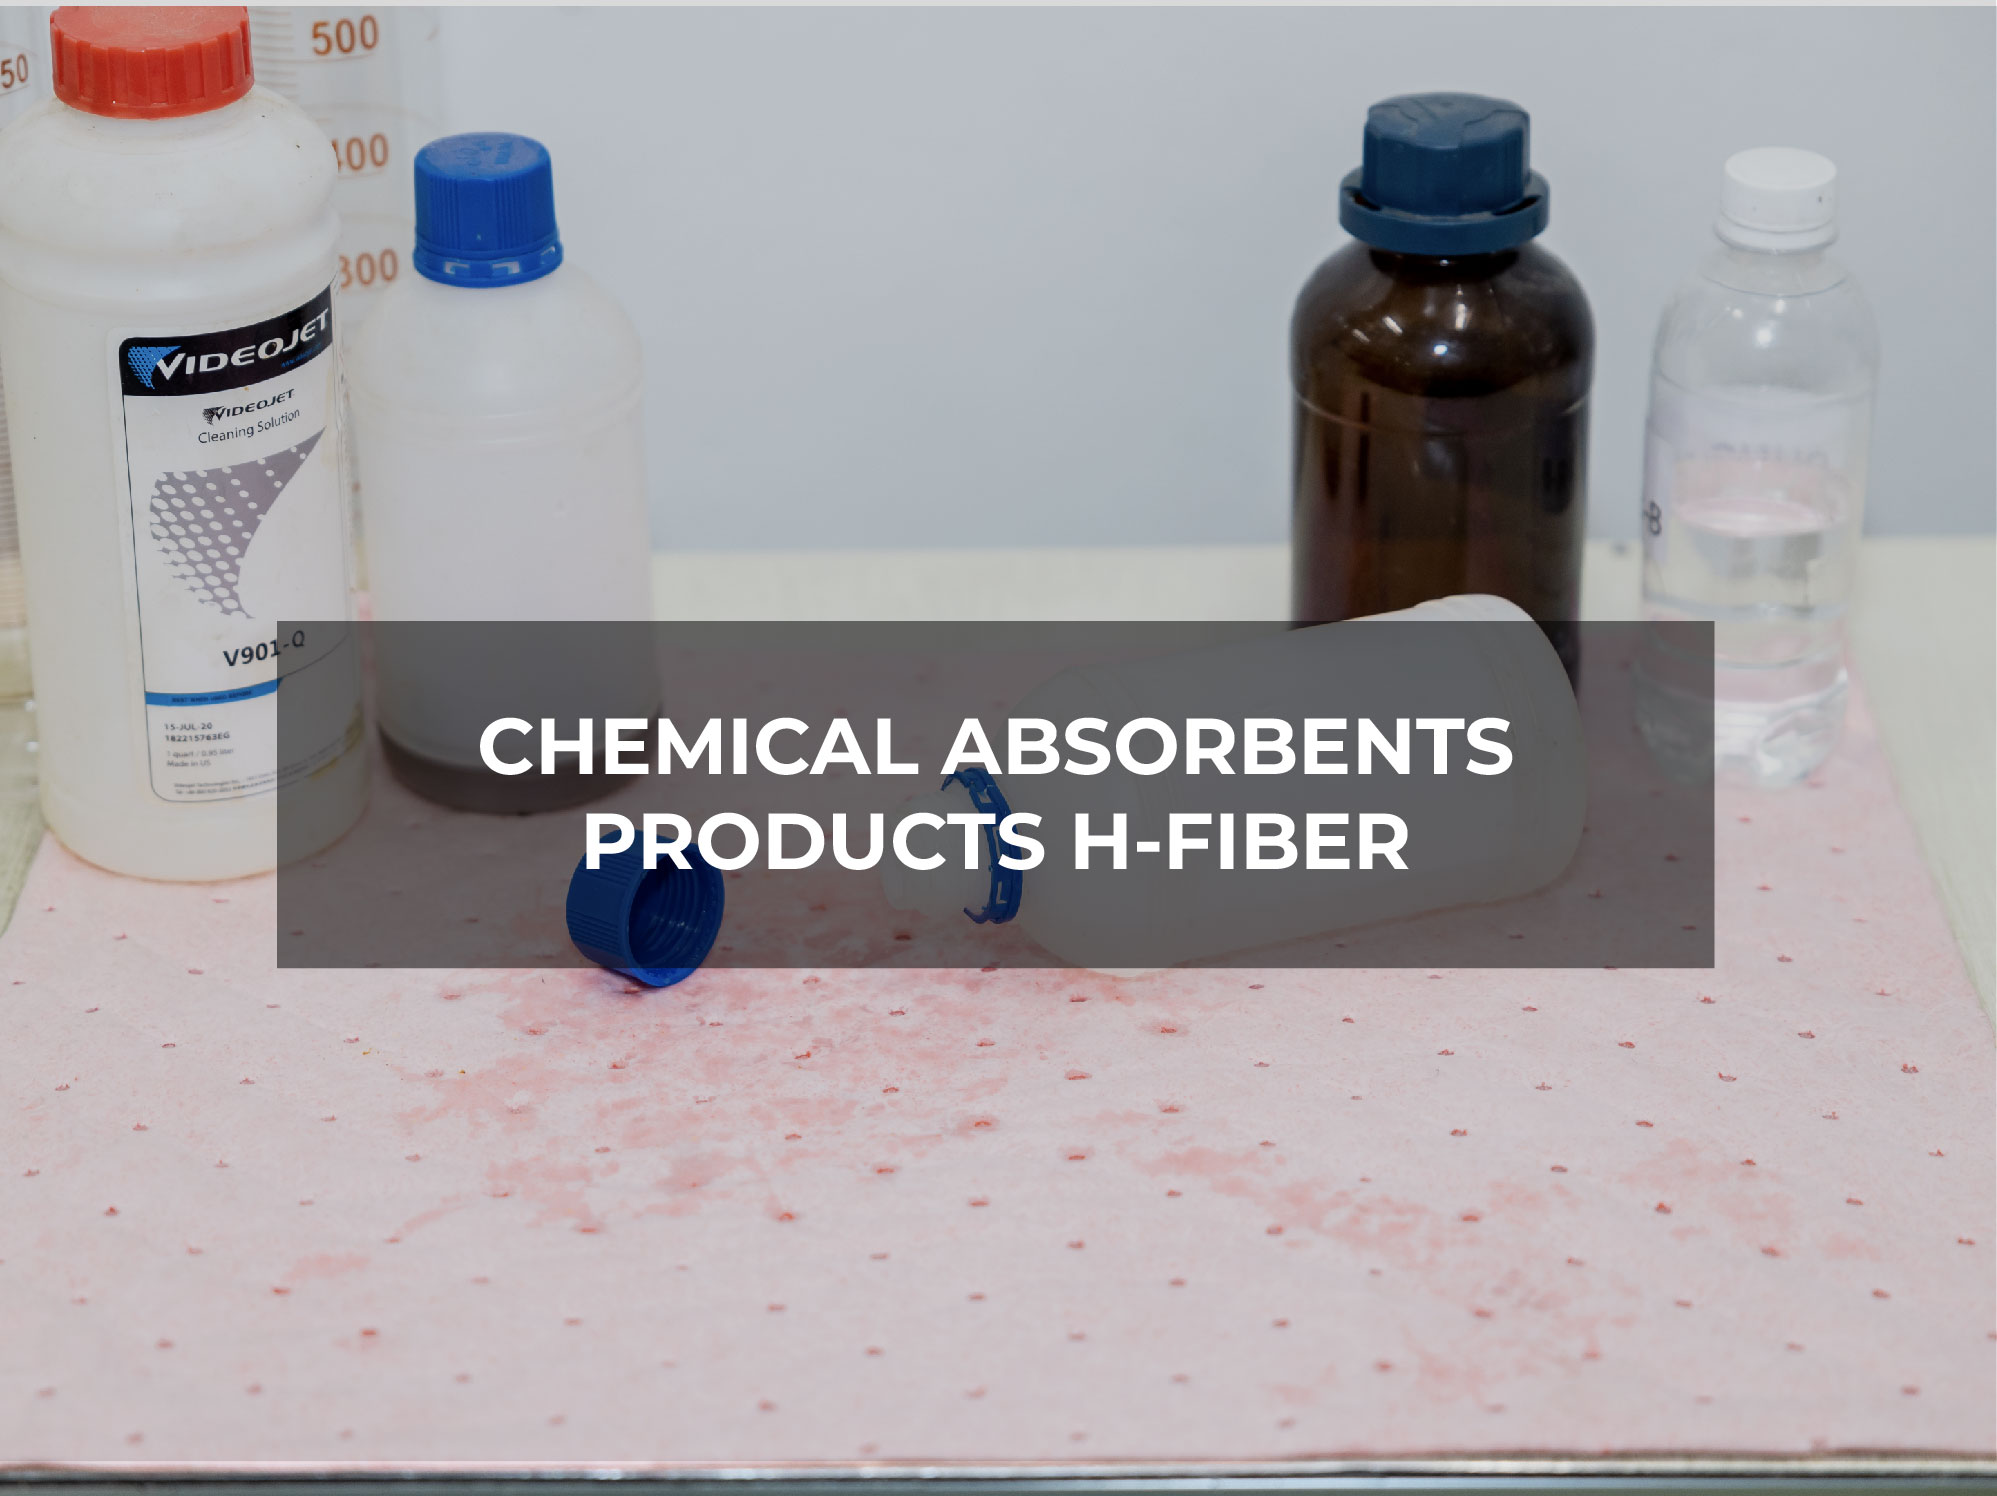 CHEMICAL ABSORBENTS